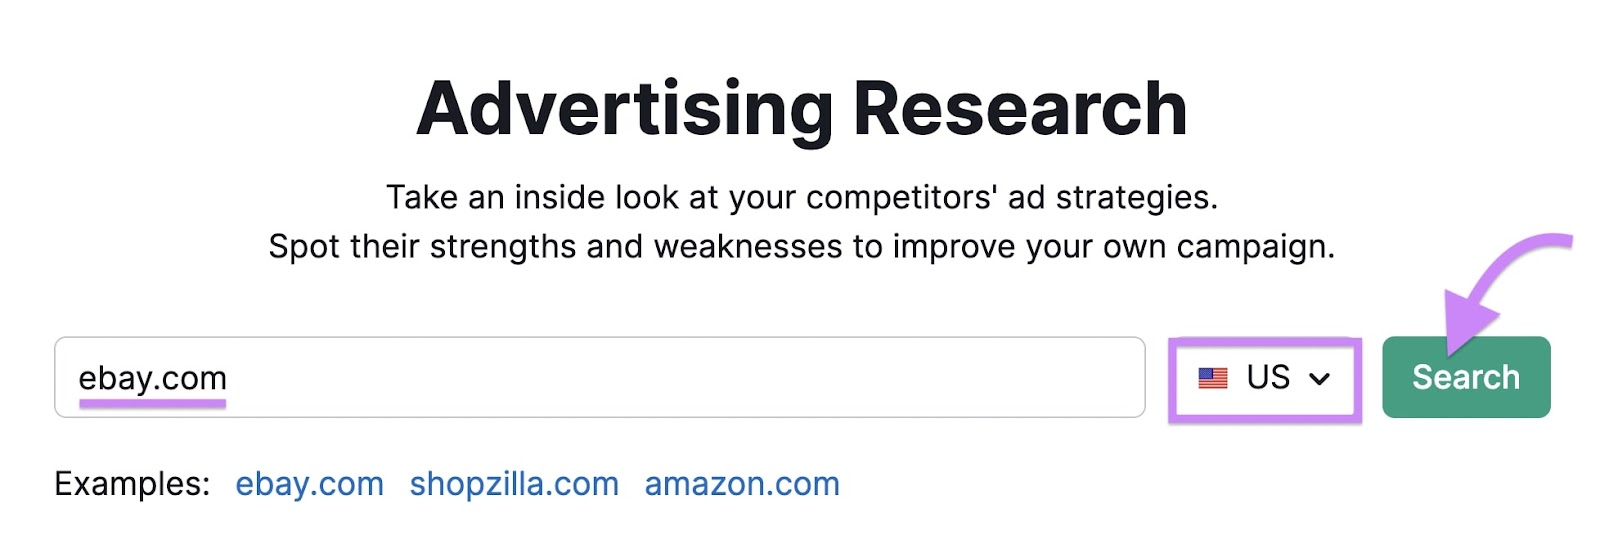 "ebay.com" entered into the Advertising Research tool